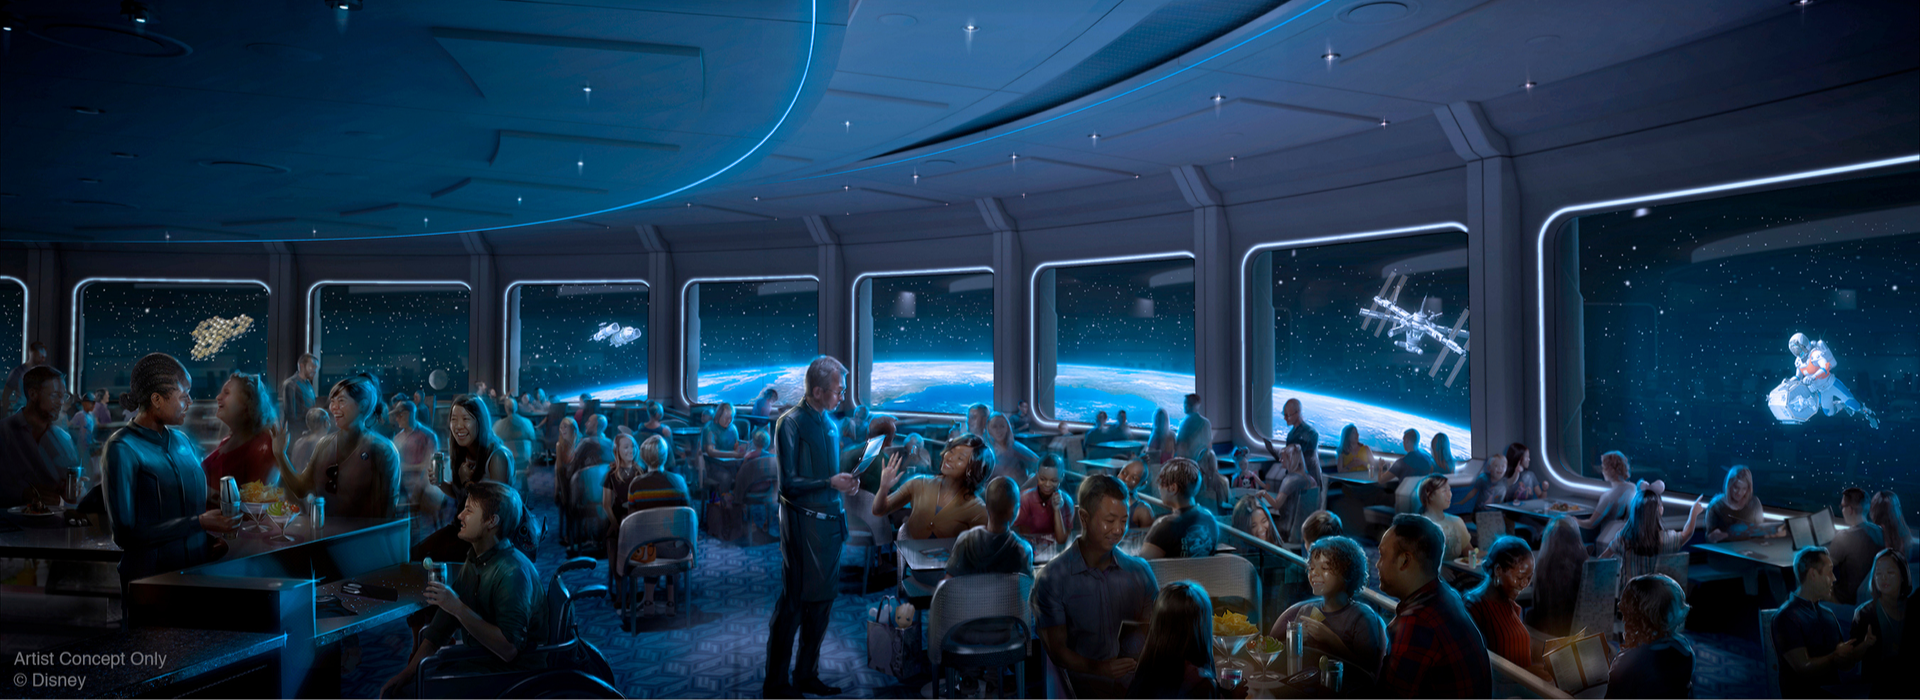 Space 220 Restaurant Now Slated to Open in April at EPCOT - WDW ...